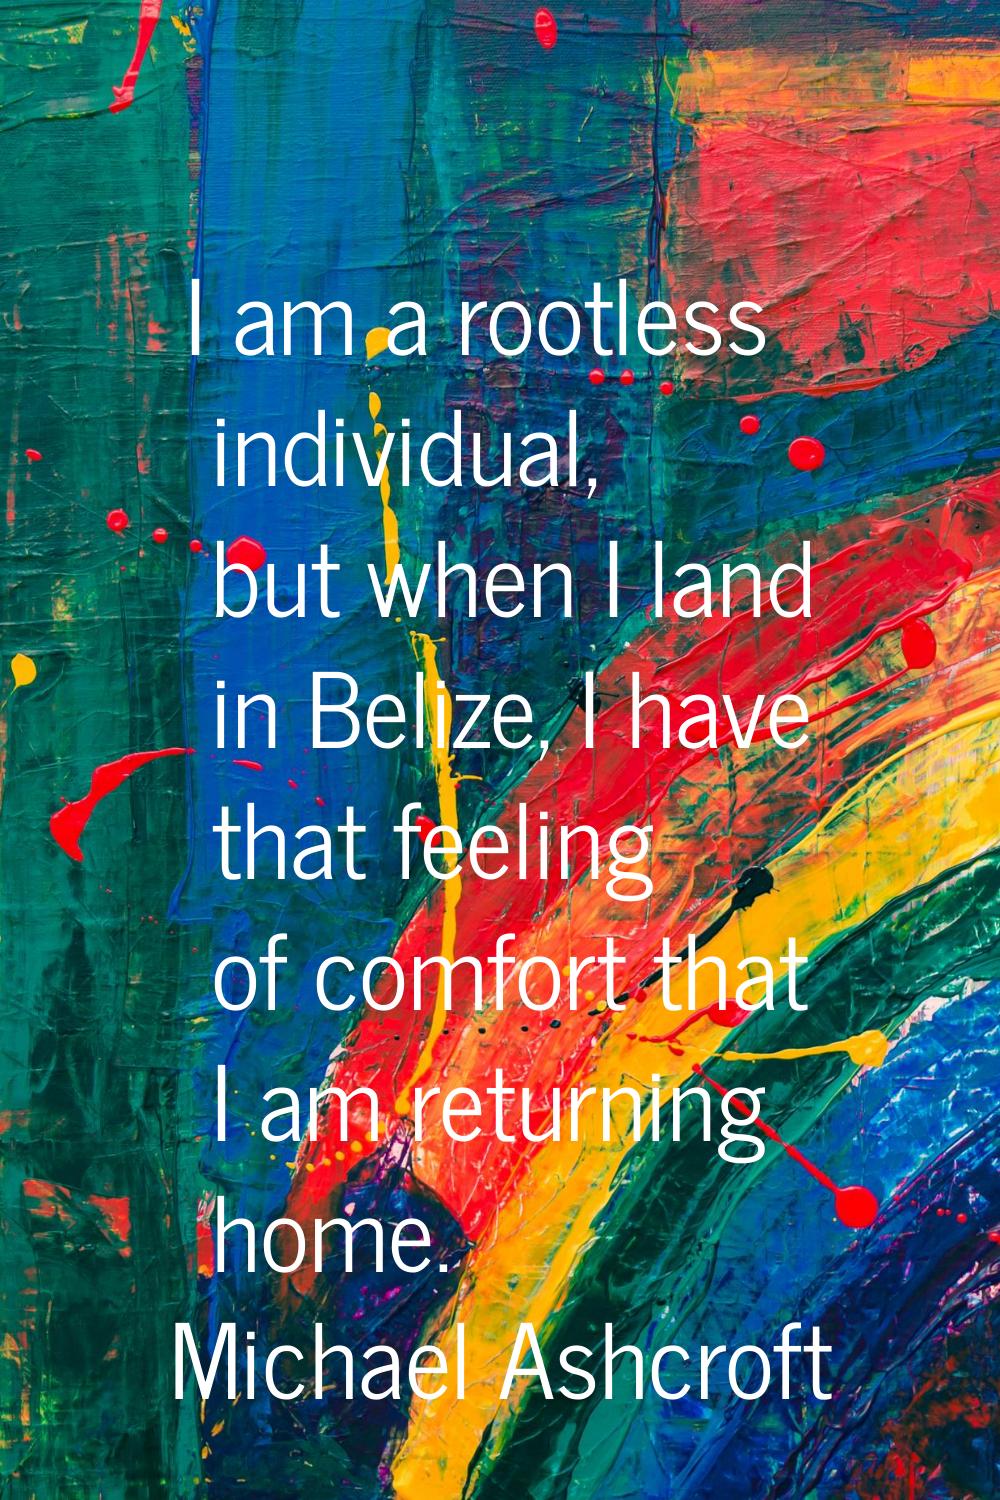 I am a rootless individual, but when I land in Belize, I have that feeling of comfort that I am ret